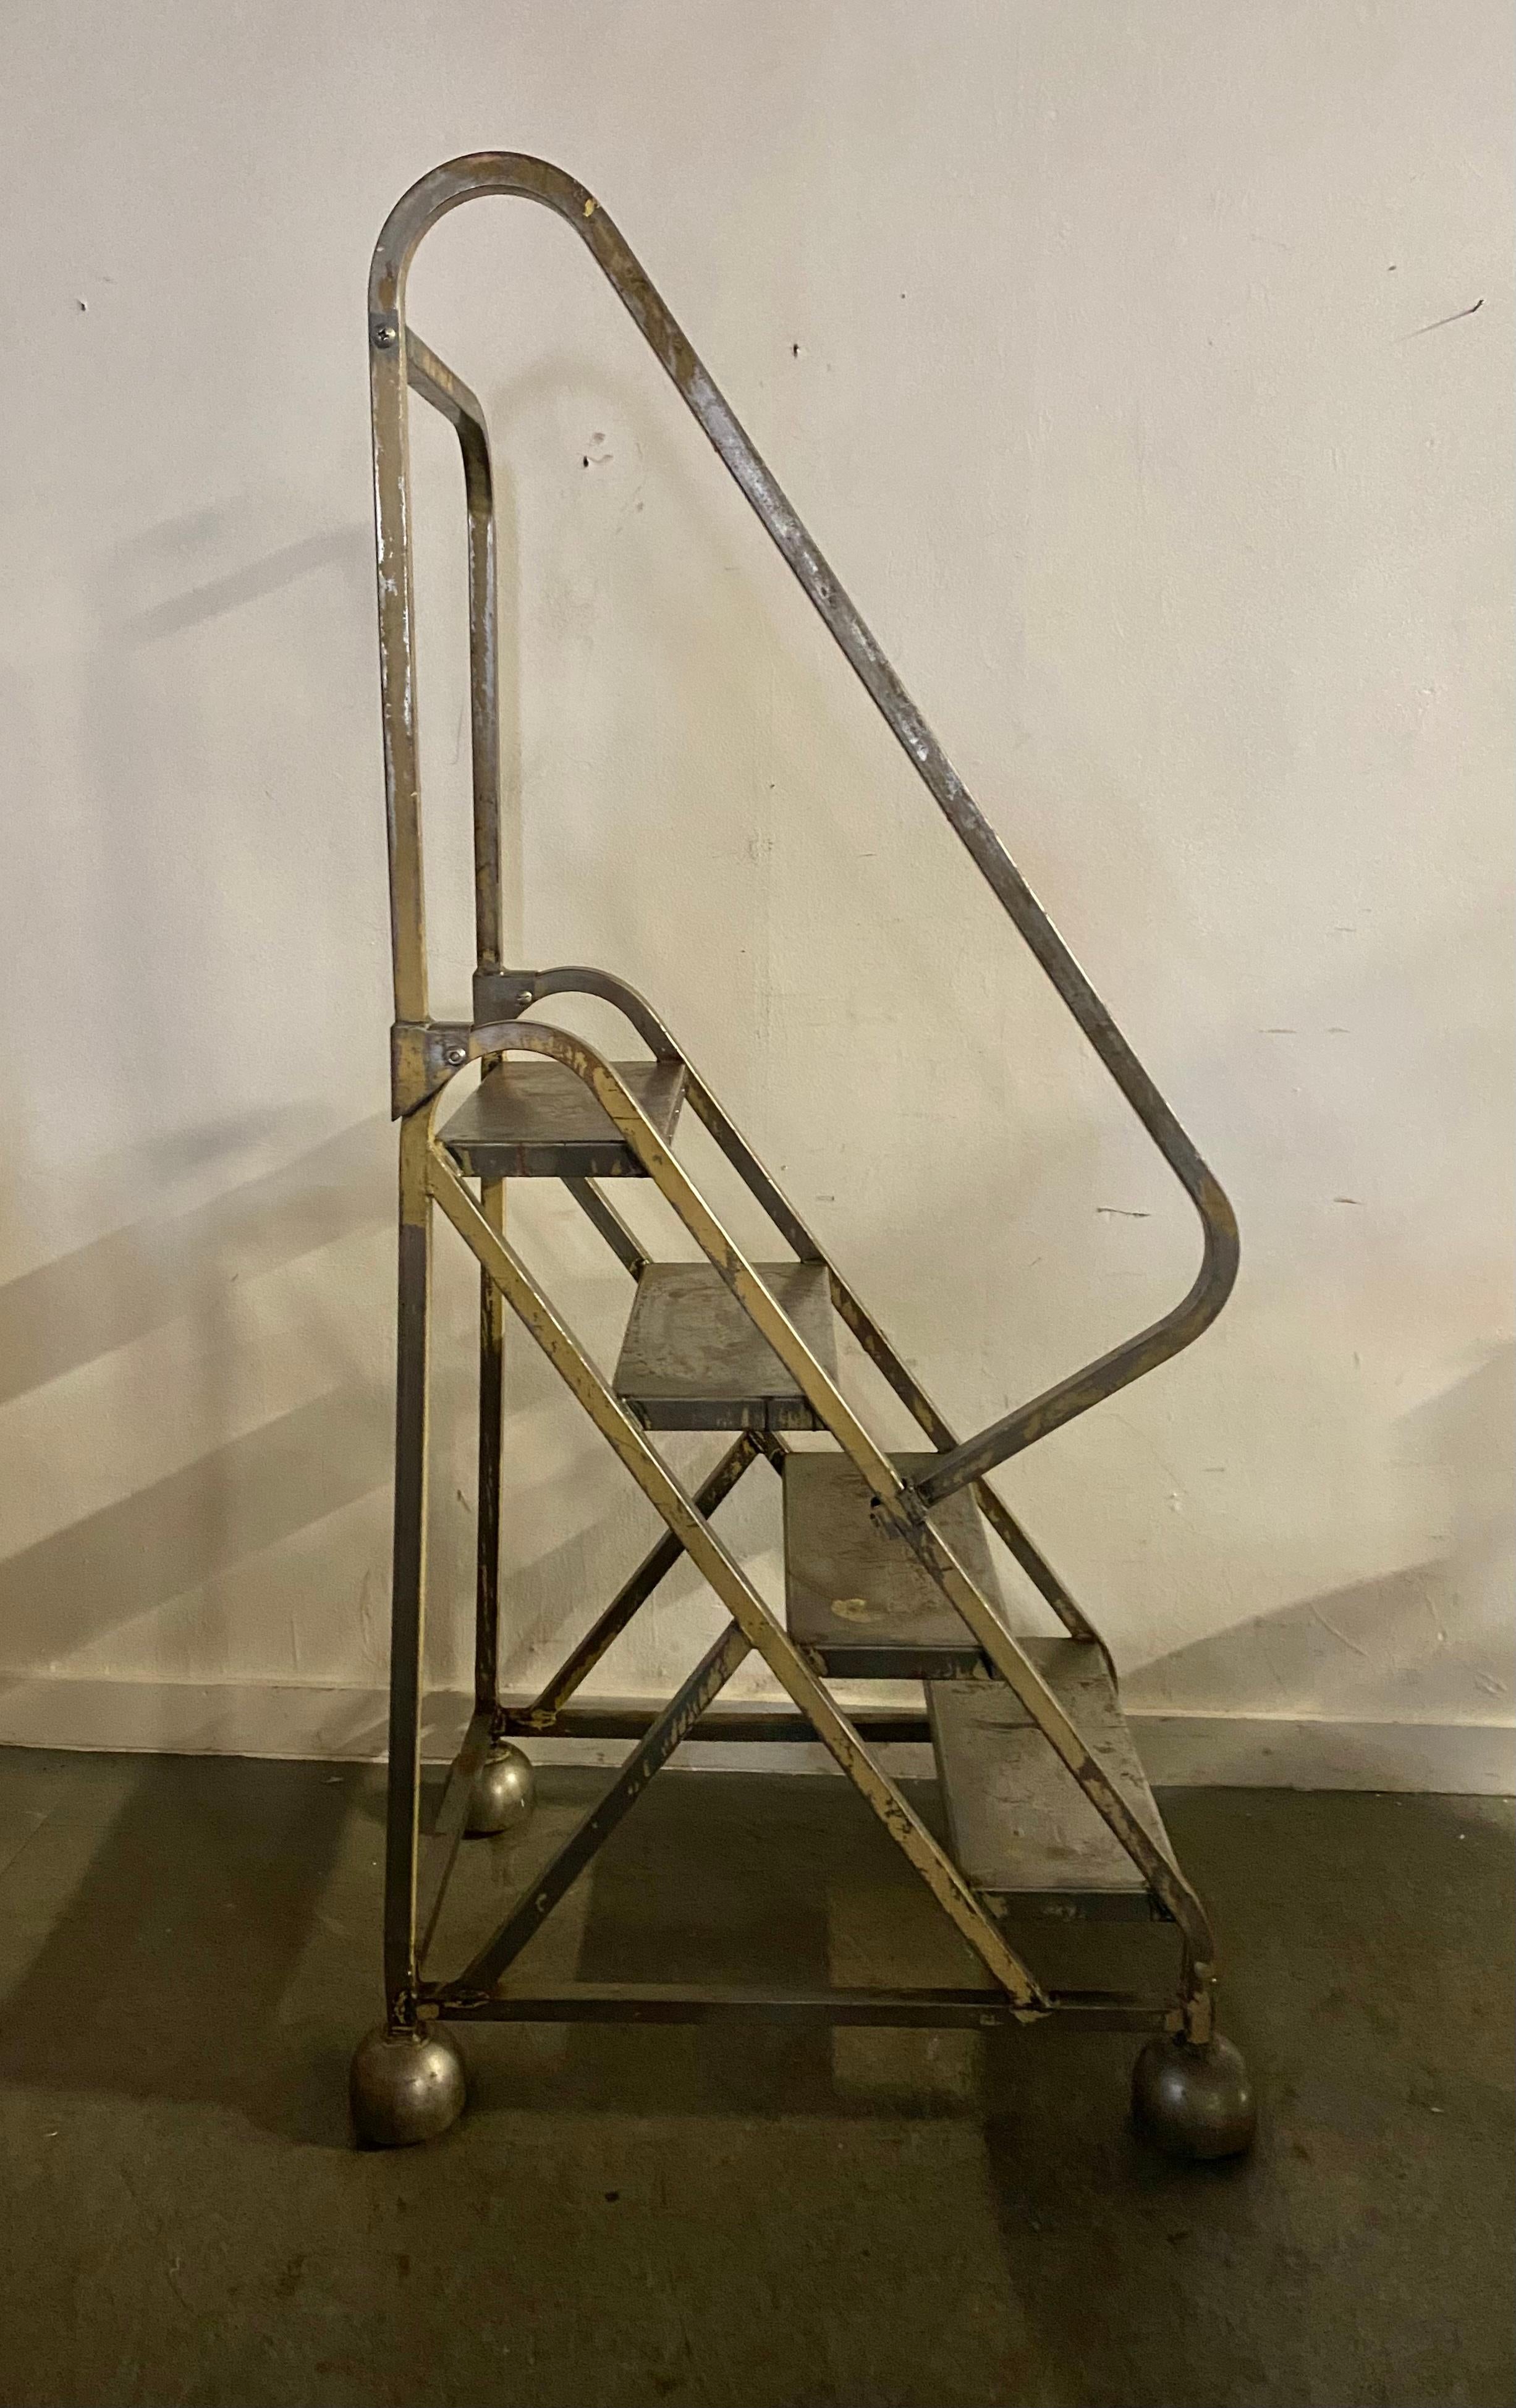 American Industrial Rolling work platform / steps/ ladder by Cotterman co... Classic design,, Wonderful patina.. fully functional.. Art / sculpture.Hand delivery avail to New yORK cITY OR anywhere en route from buffalo NY